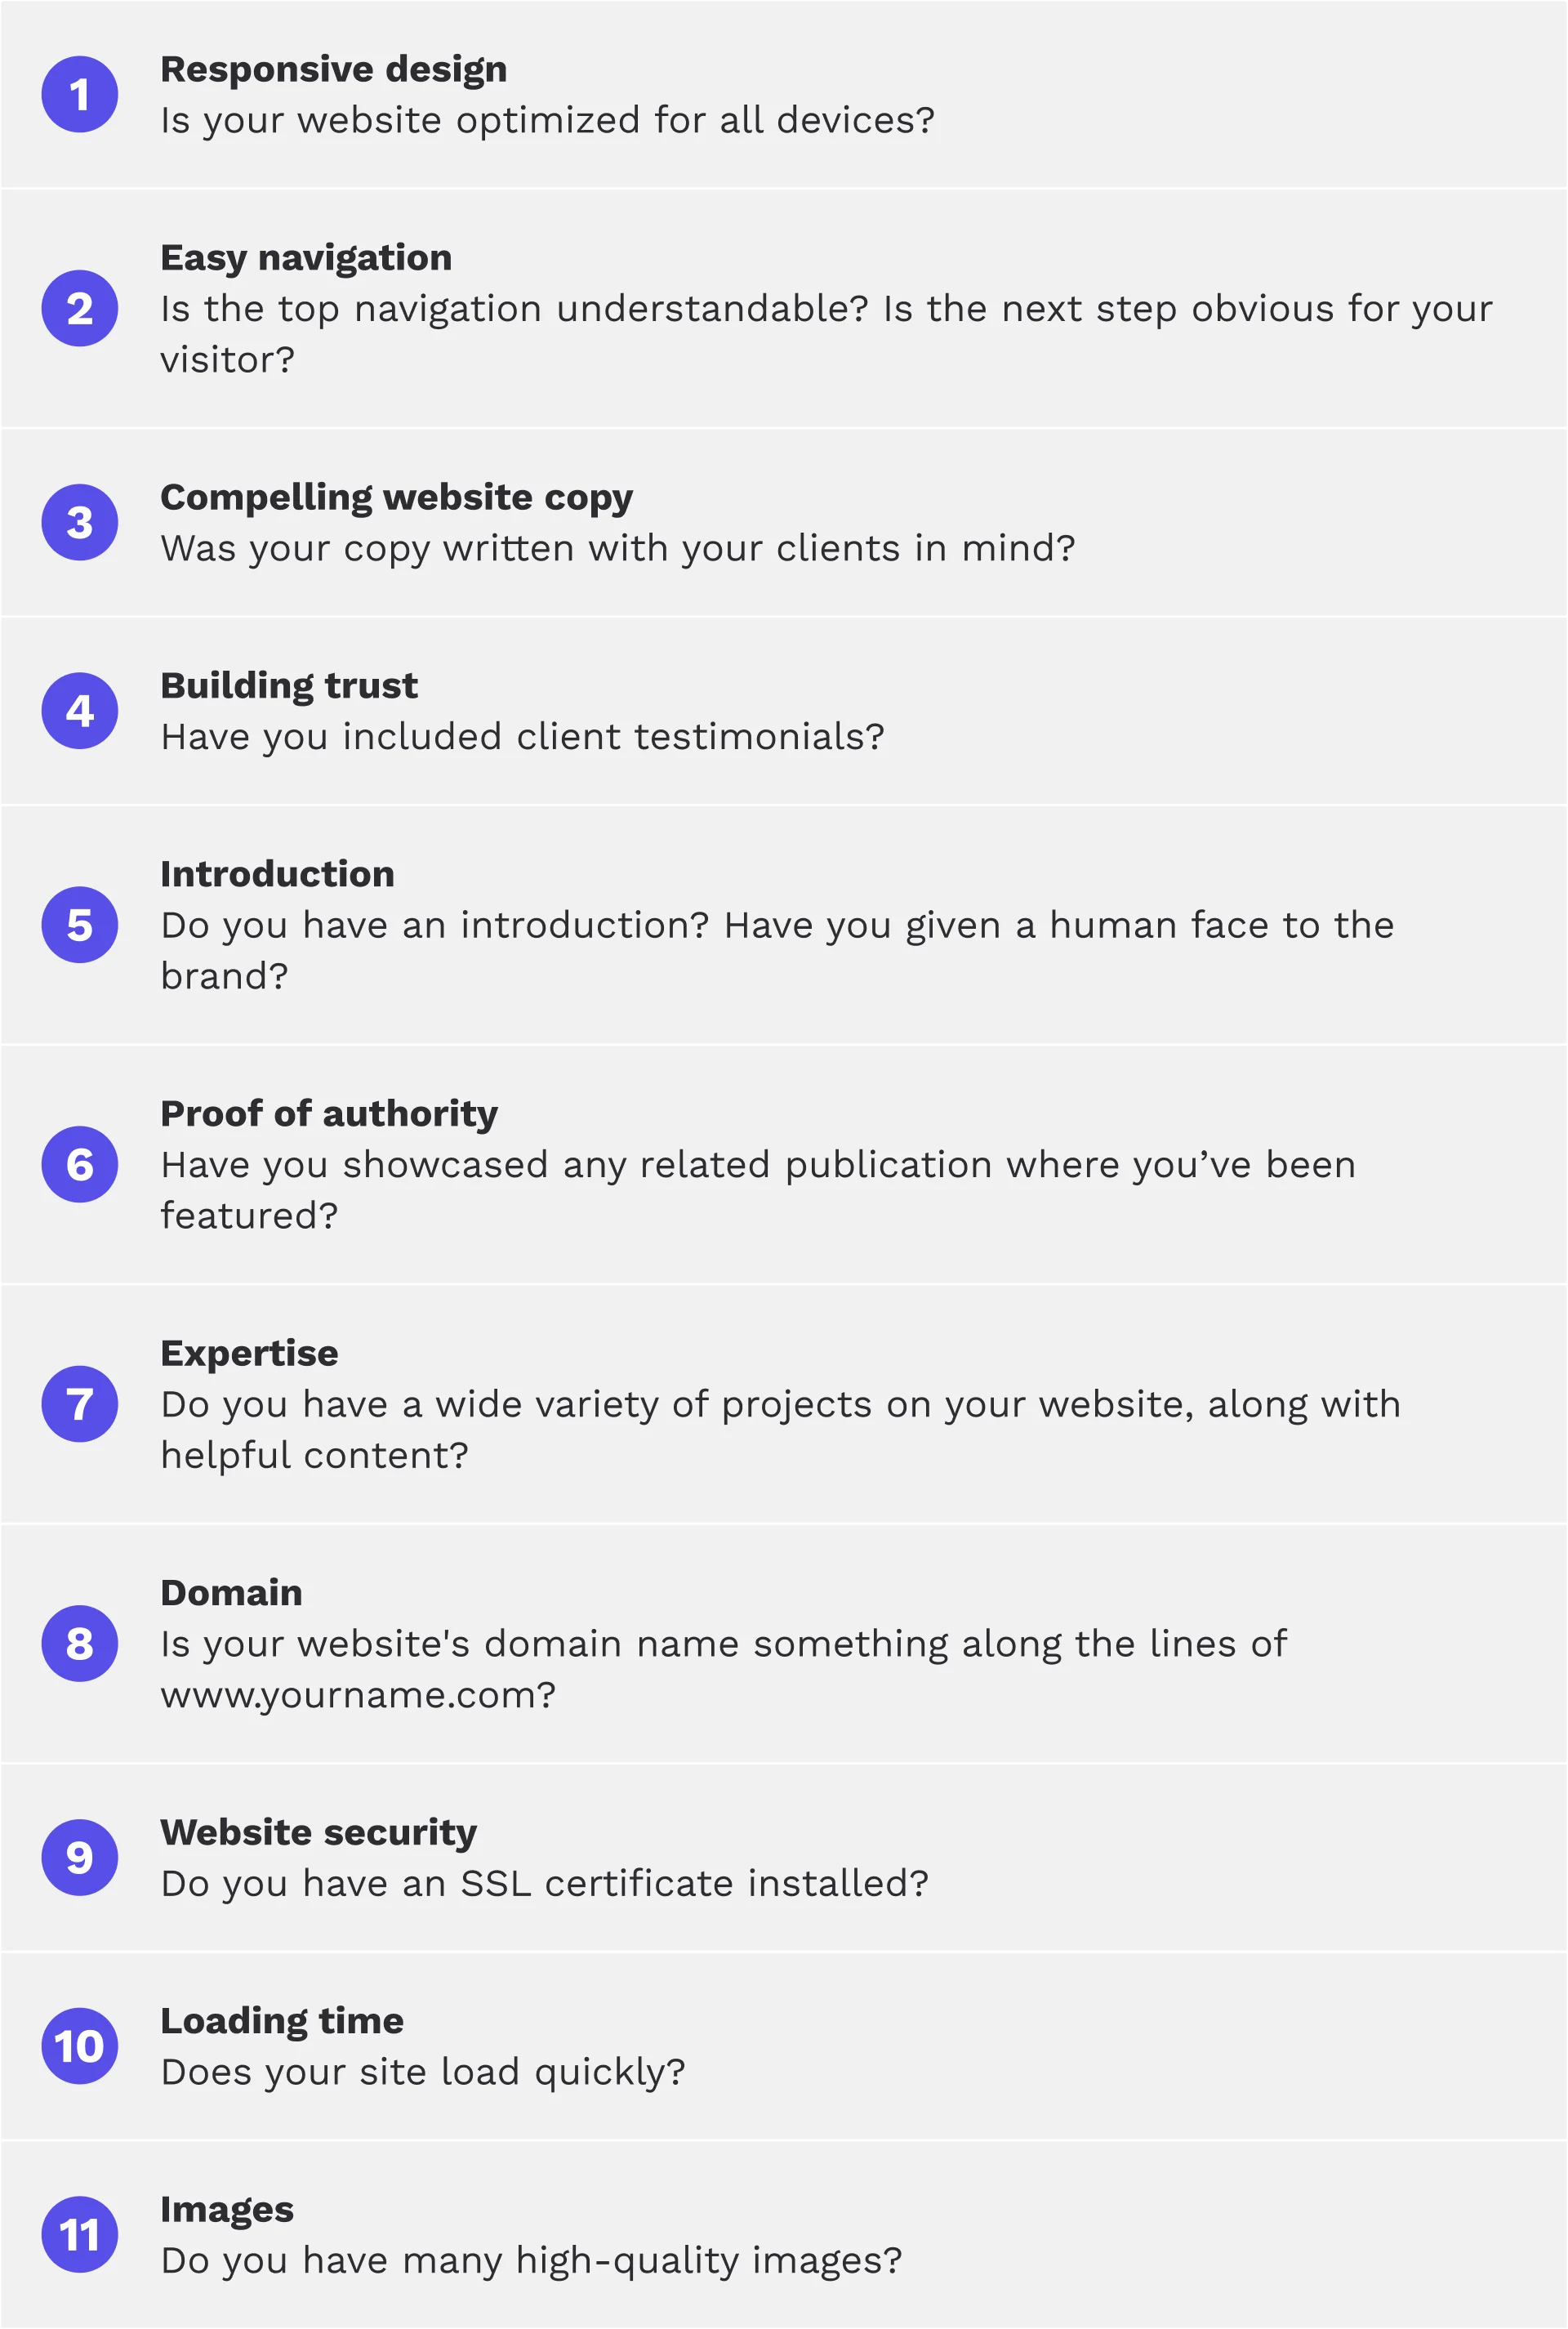 A checklist with 11 items to evaluate your architecture website's efficiency